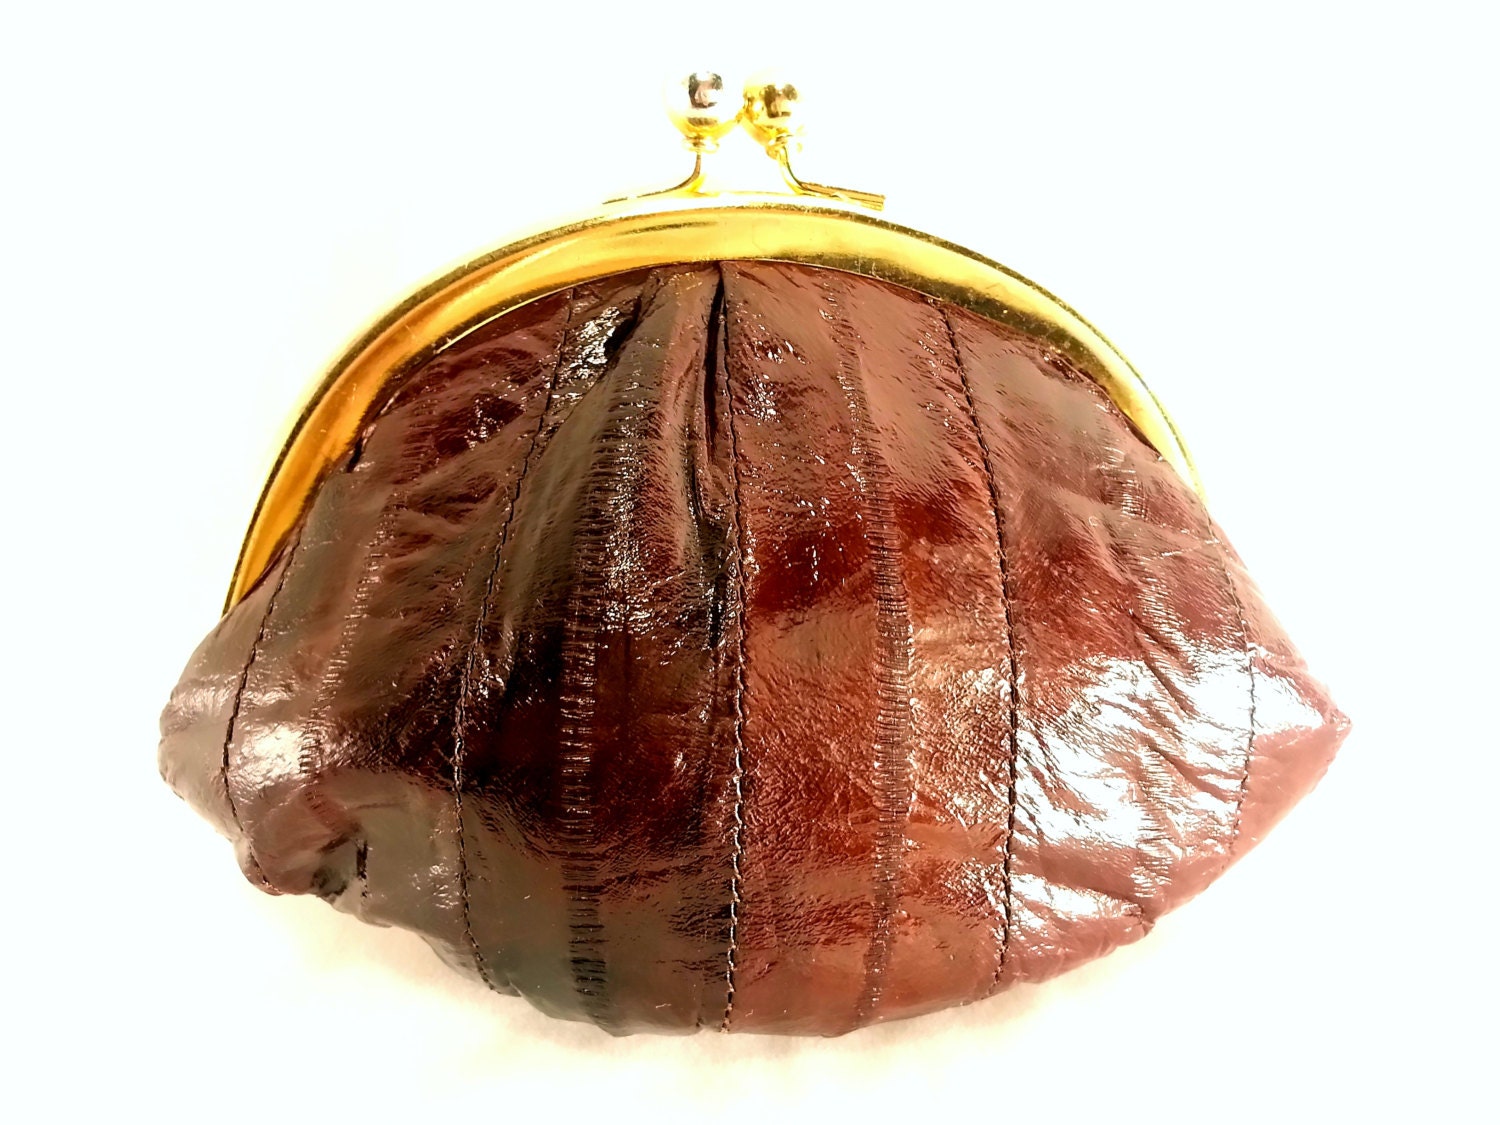 Vintage Eel Skin Coin Purse by HandbagHippo on Etsy